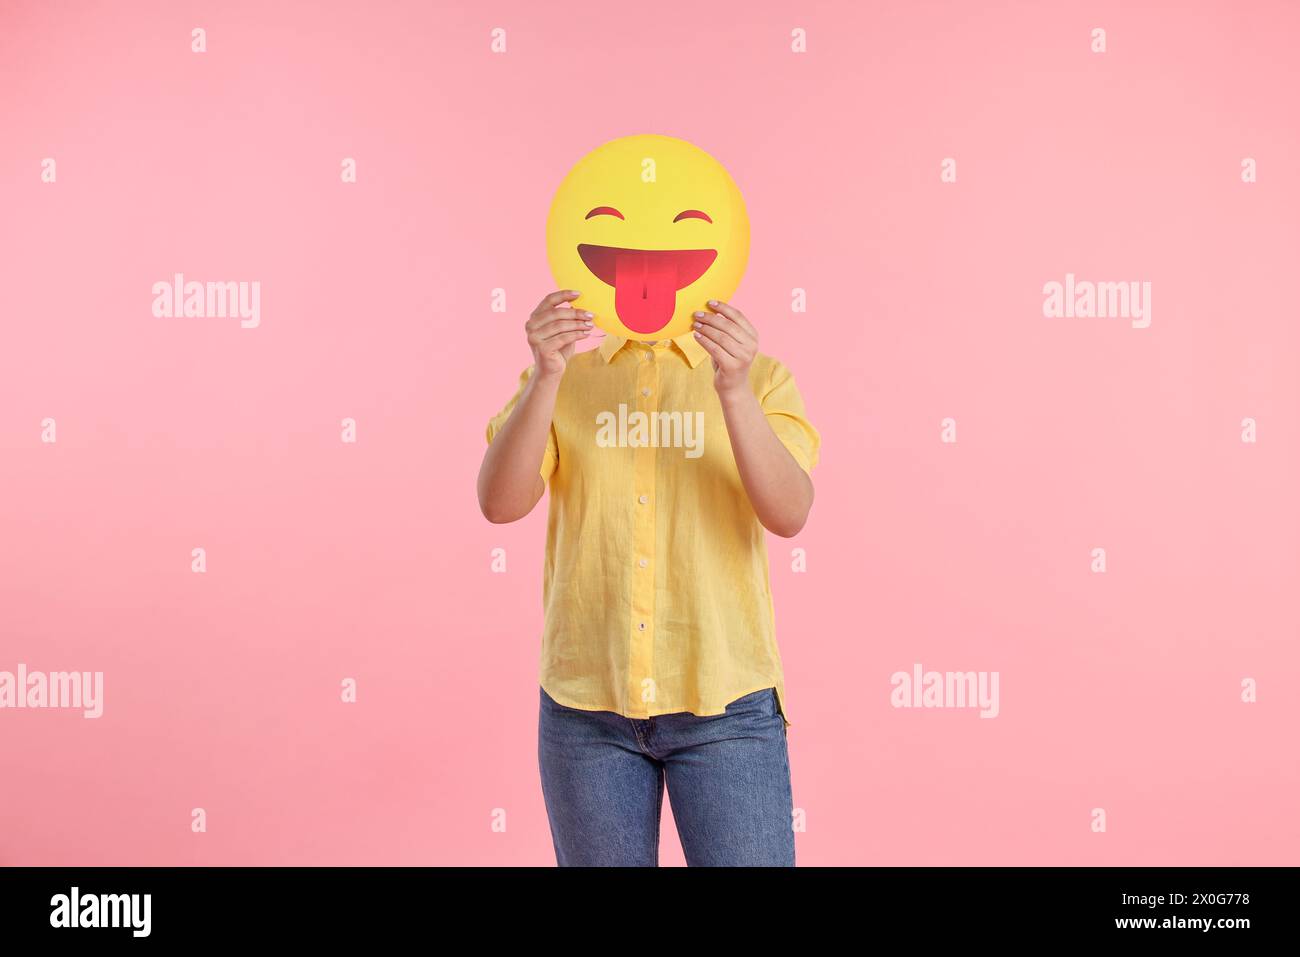 Woman covering face with emoticon sticking out tongue on pink background Stock Photo